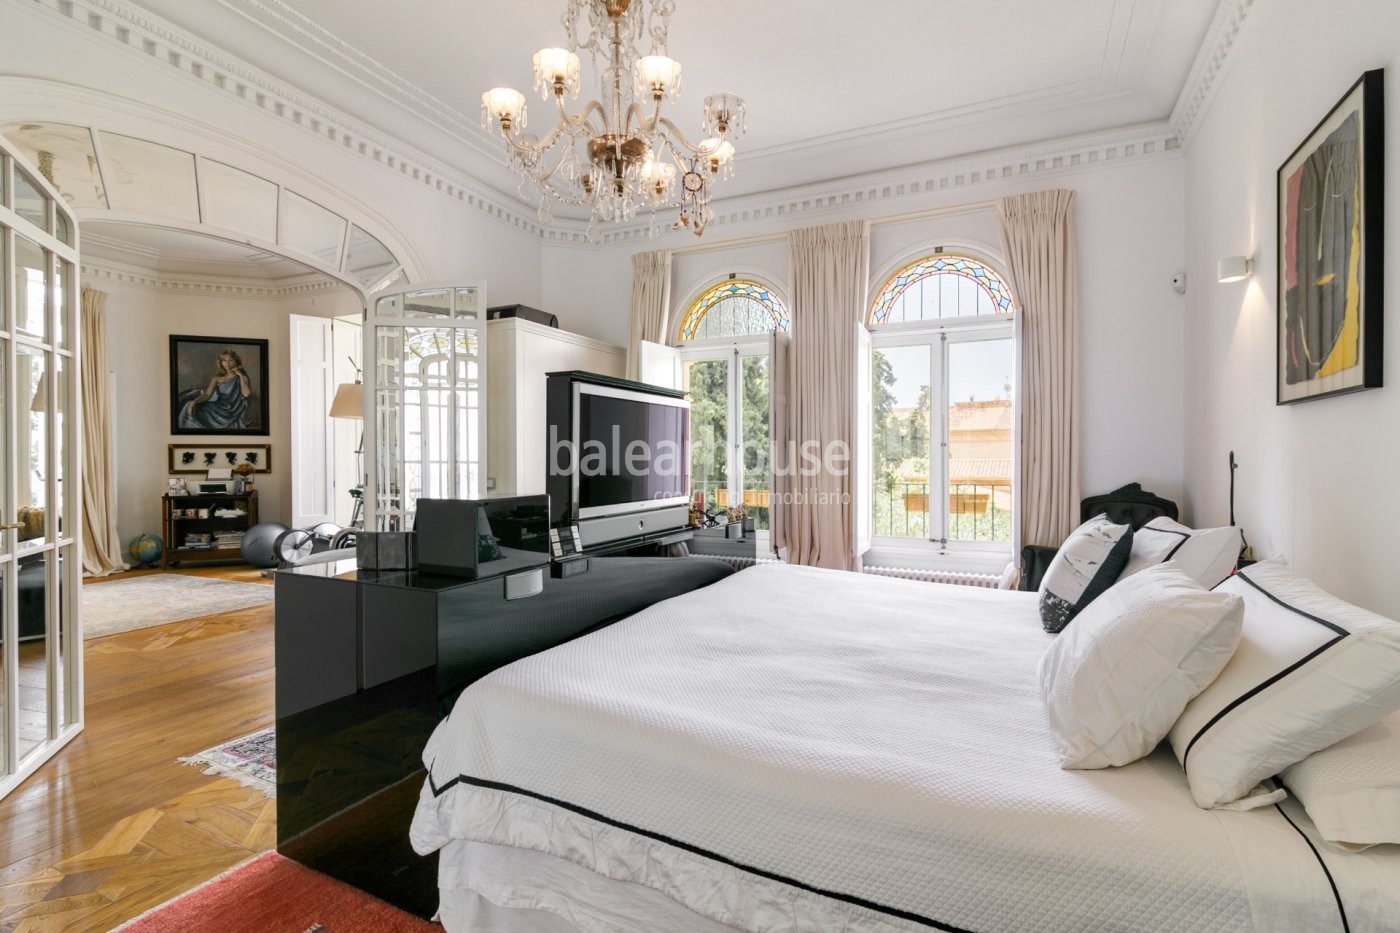 Exclusive renovated grand palace in the old town with privileged views of the cathedral